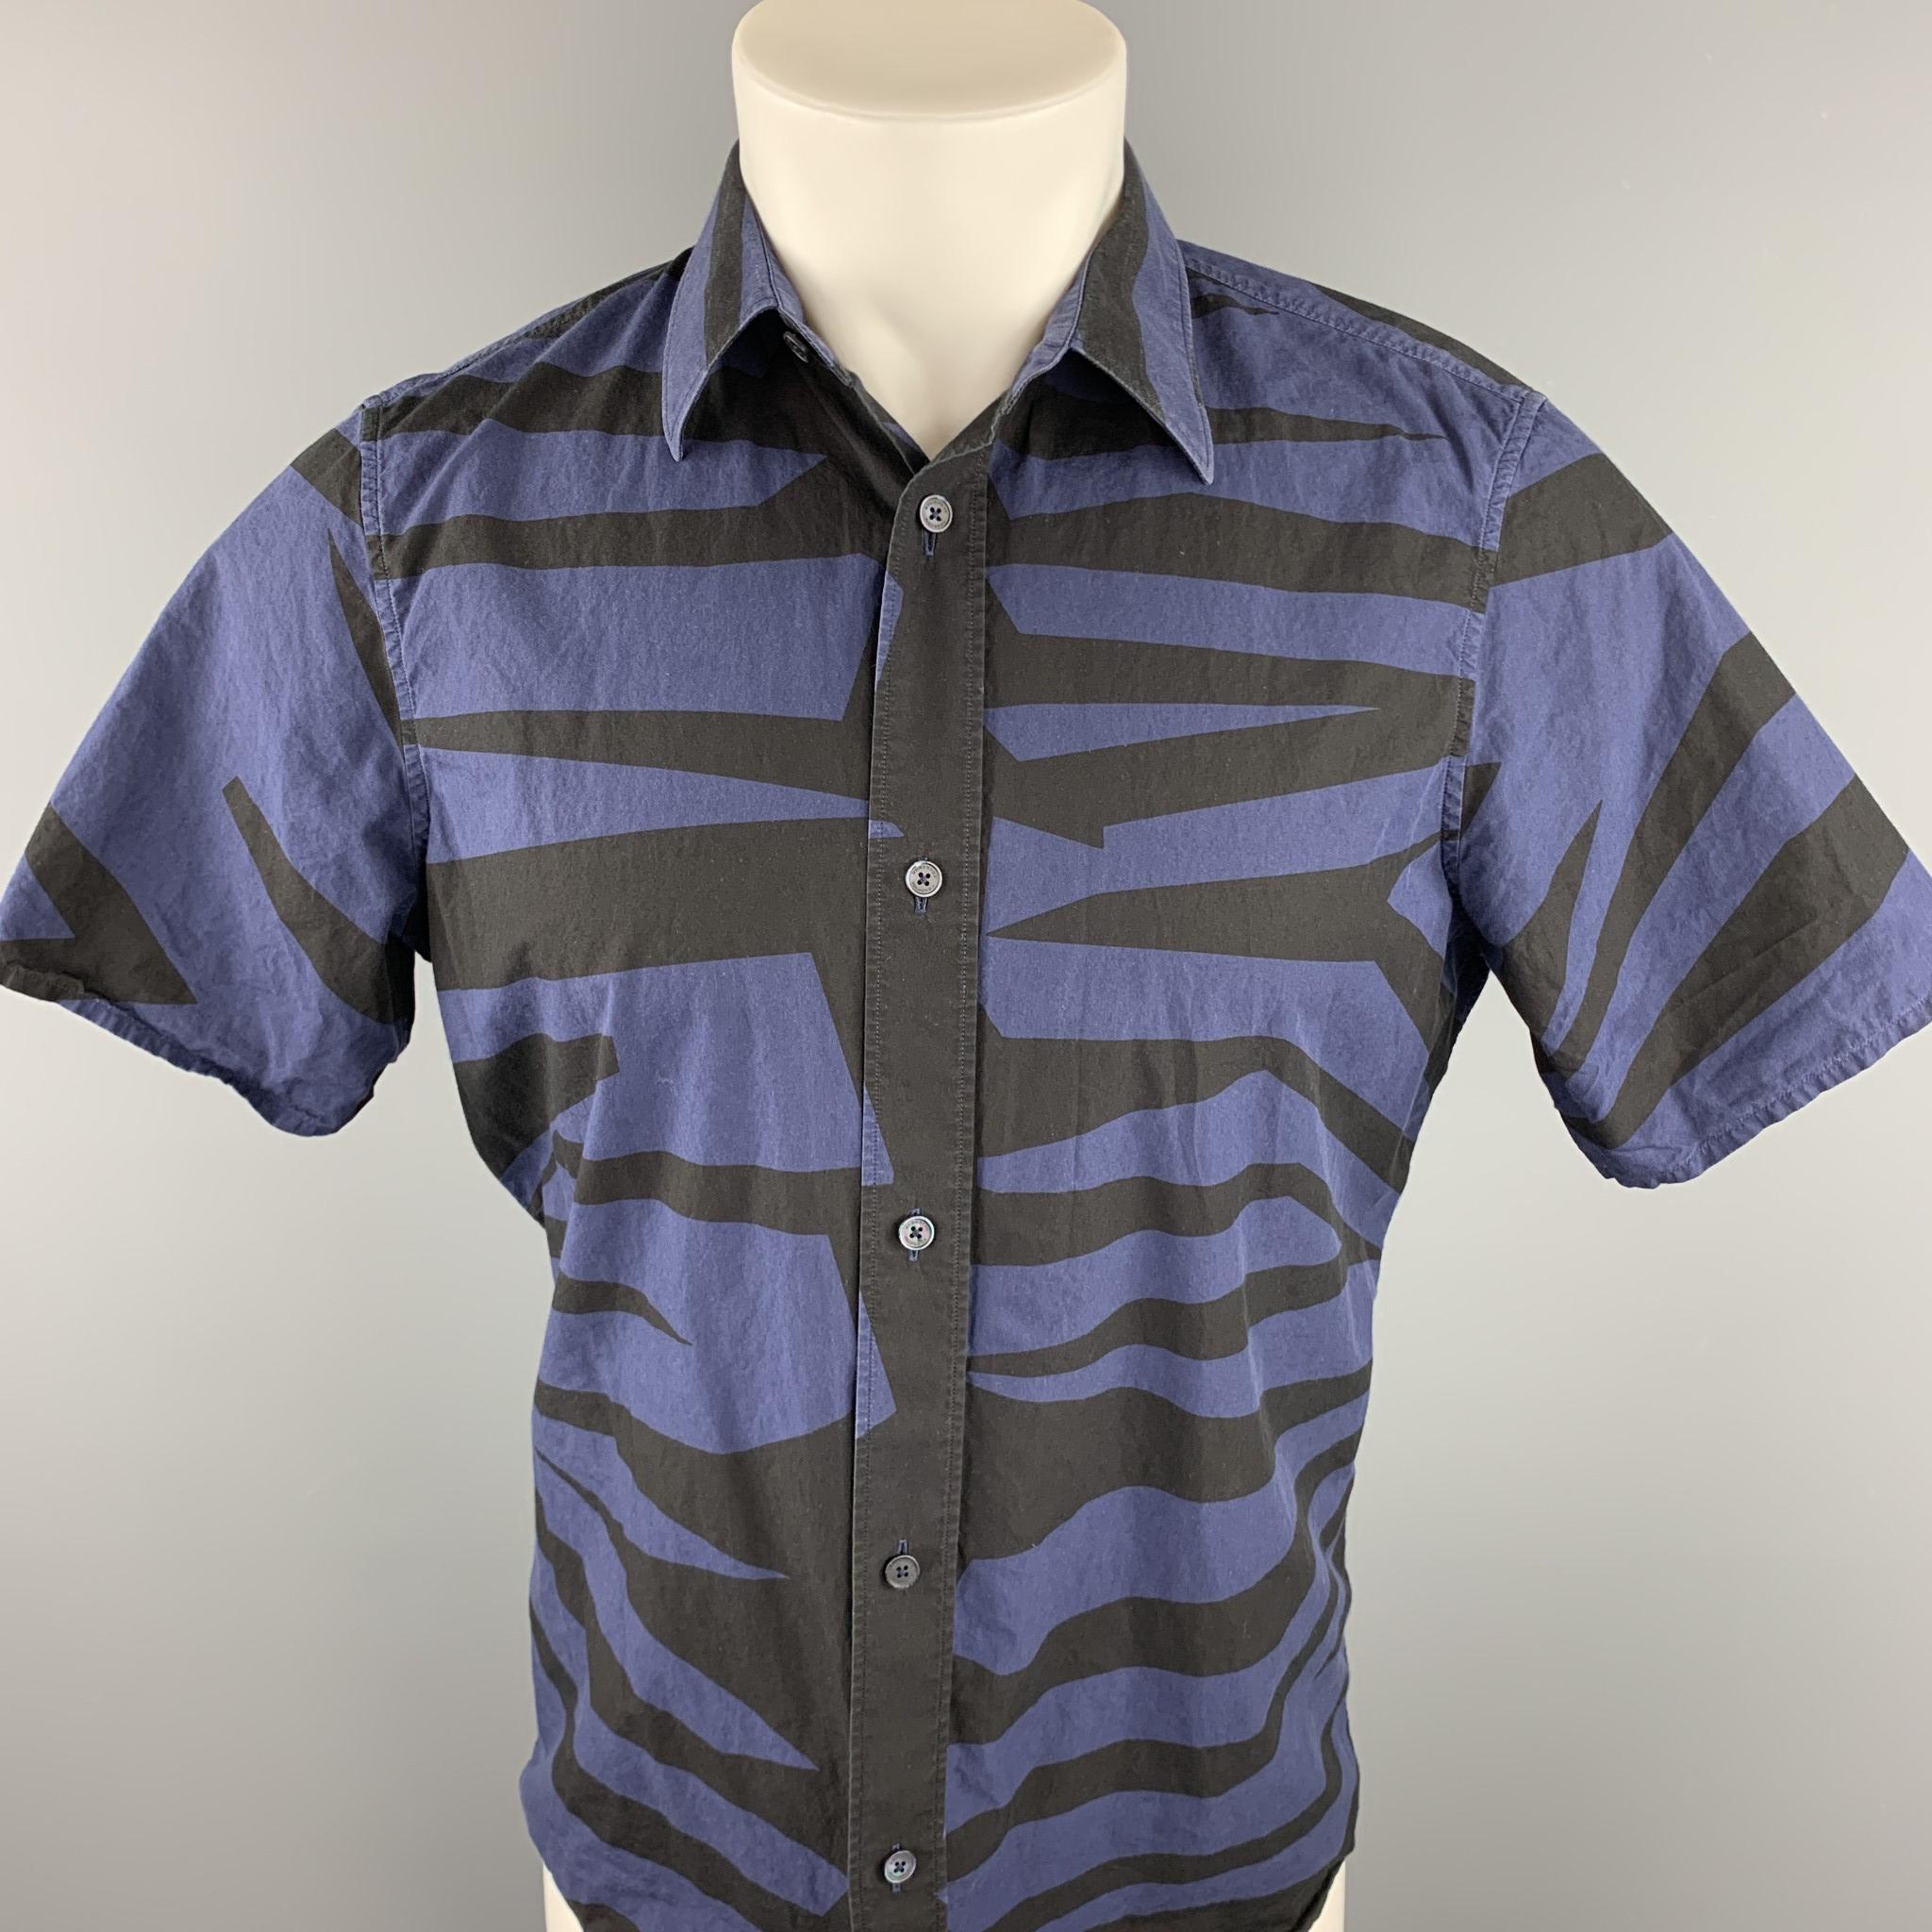 BURBERRY PRORSUM short sleeve shirt comes in a navy & black print cotton featuring a button up style and a spread collar. As-Is. Made in Italy.

Good Pre-Owned Condition.
Marked: 16-41

Measurements:

Shoulder: 16.5 in. 
Chest: 40 in. 
Sleeve: 9.5